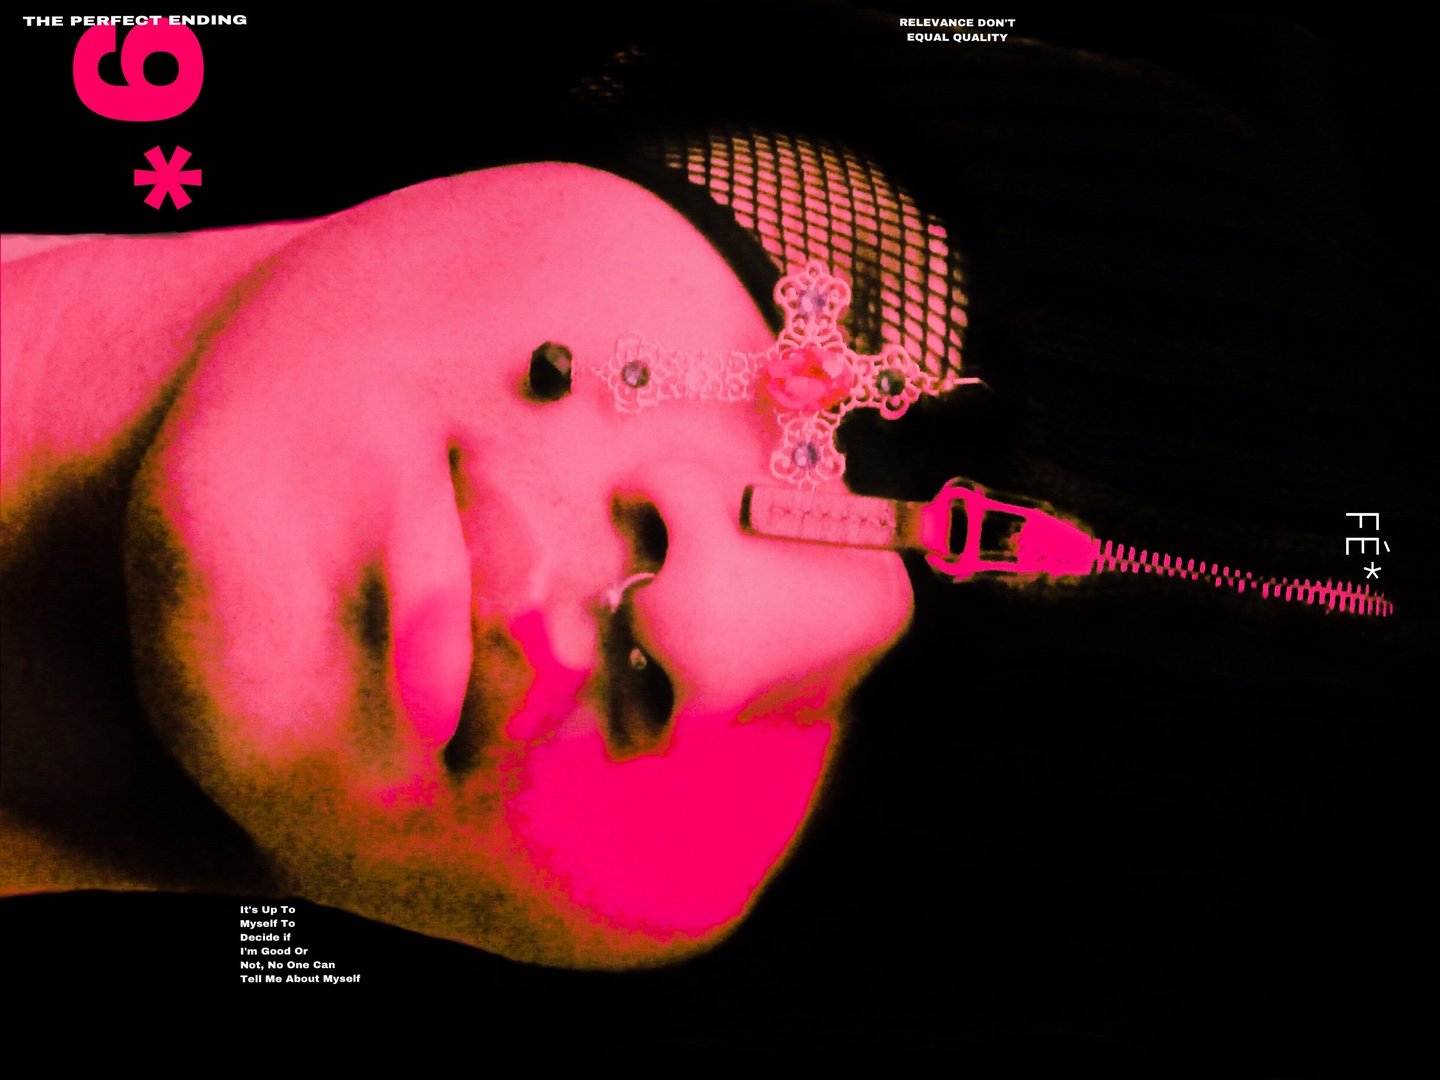 digitally edited photograph of Brandon Santana, sideways, as the cover of a fake magazine, wearing a fishnet face covering and a bejeweled crucifix, all in black and hot pink